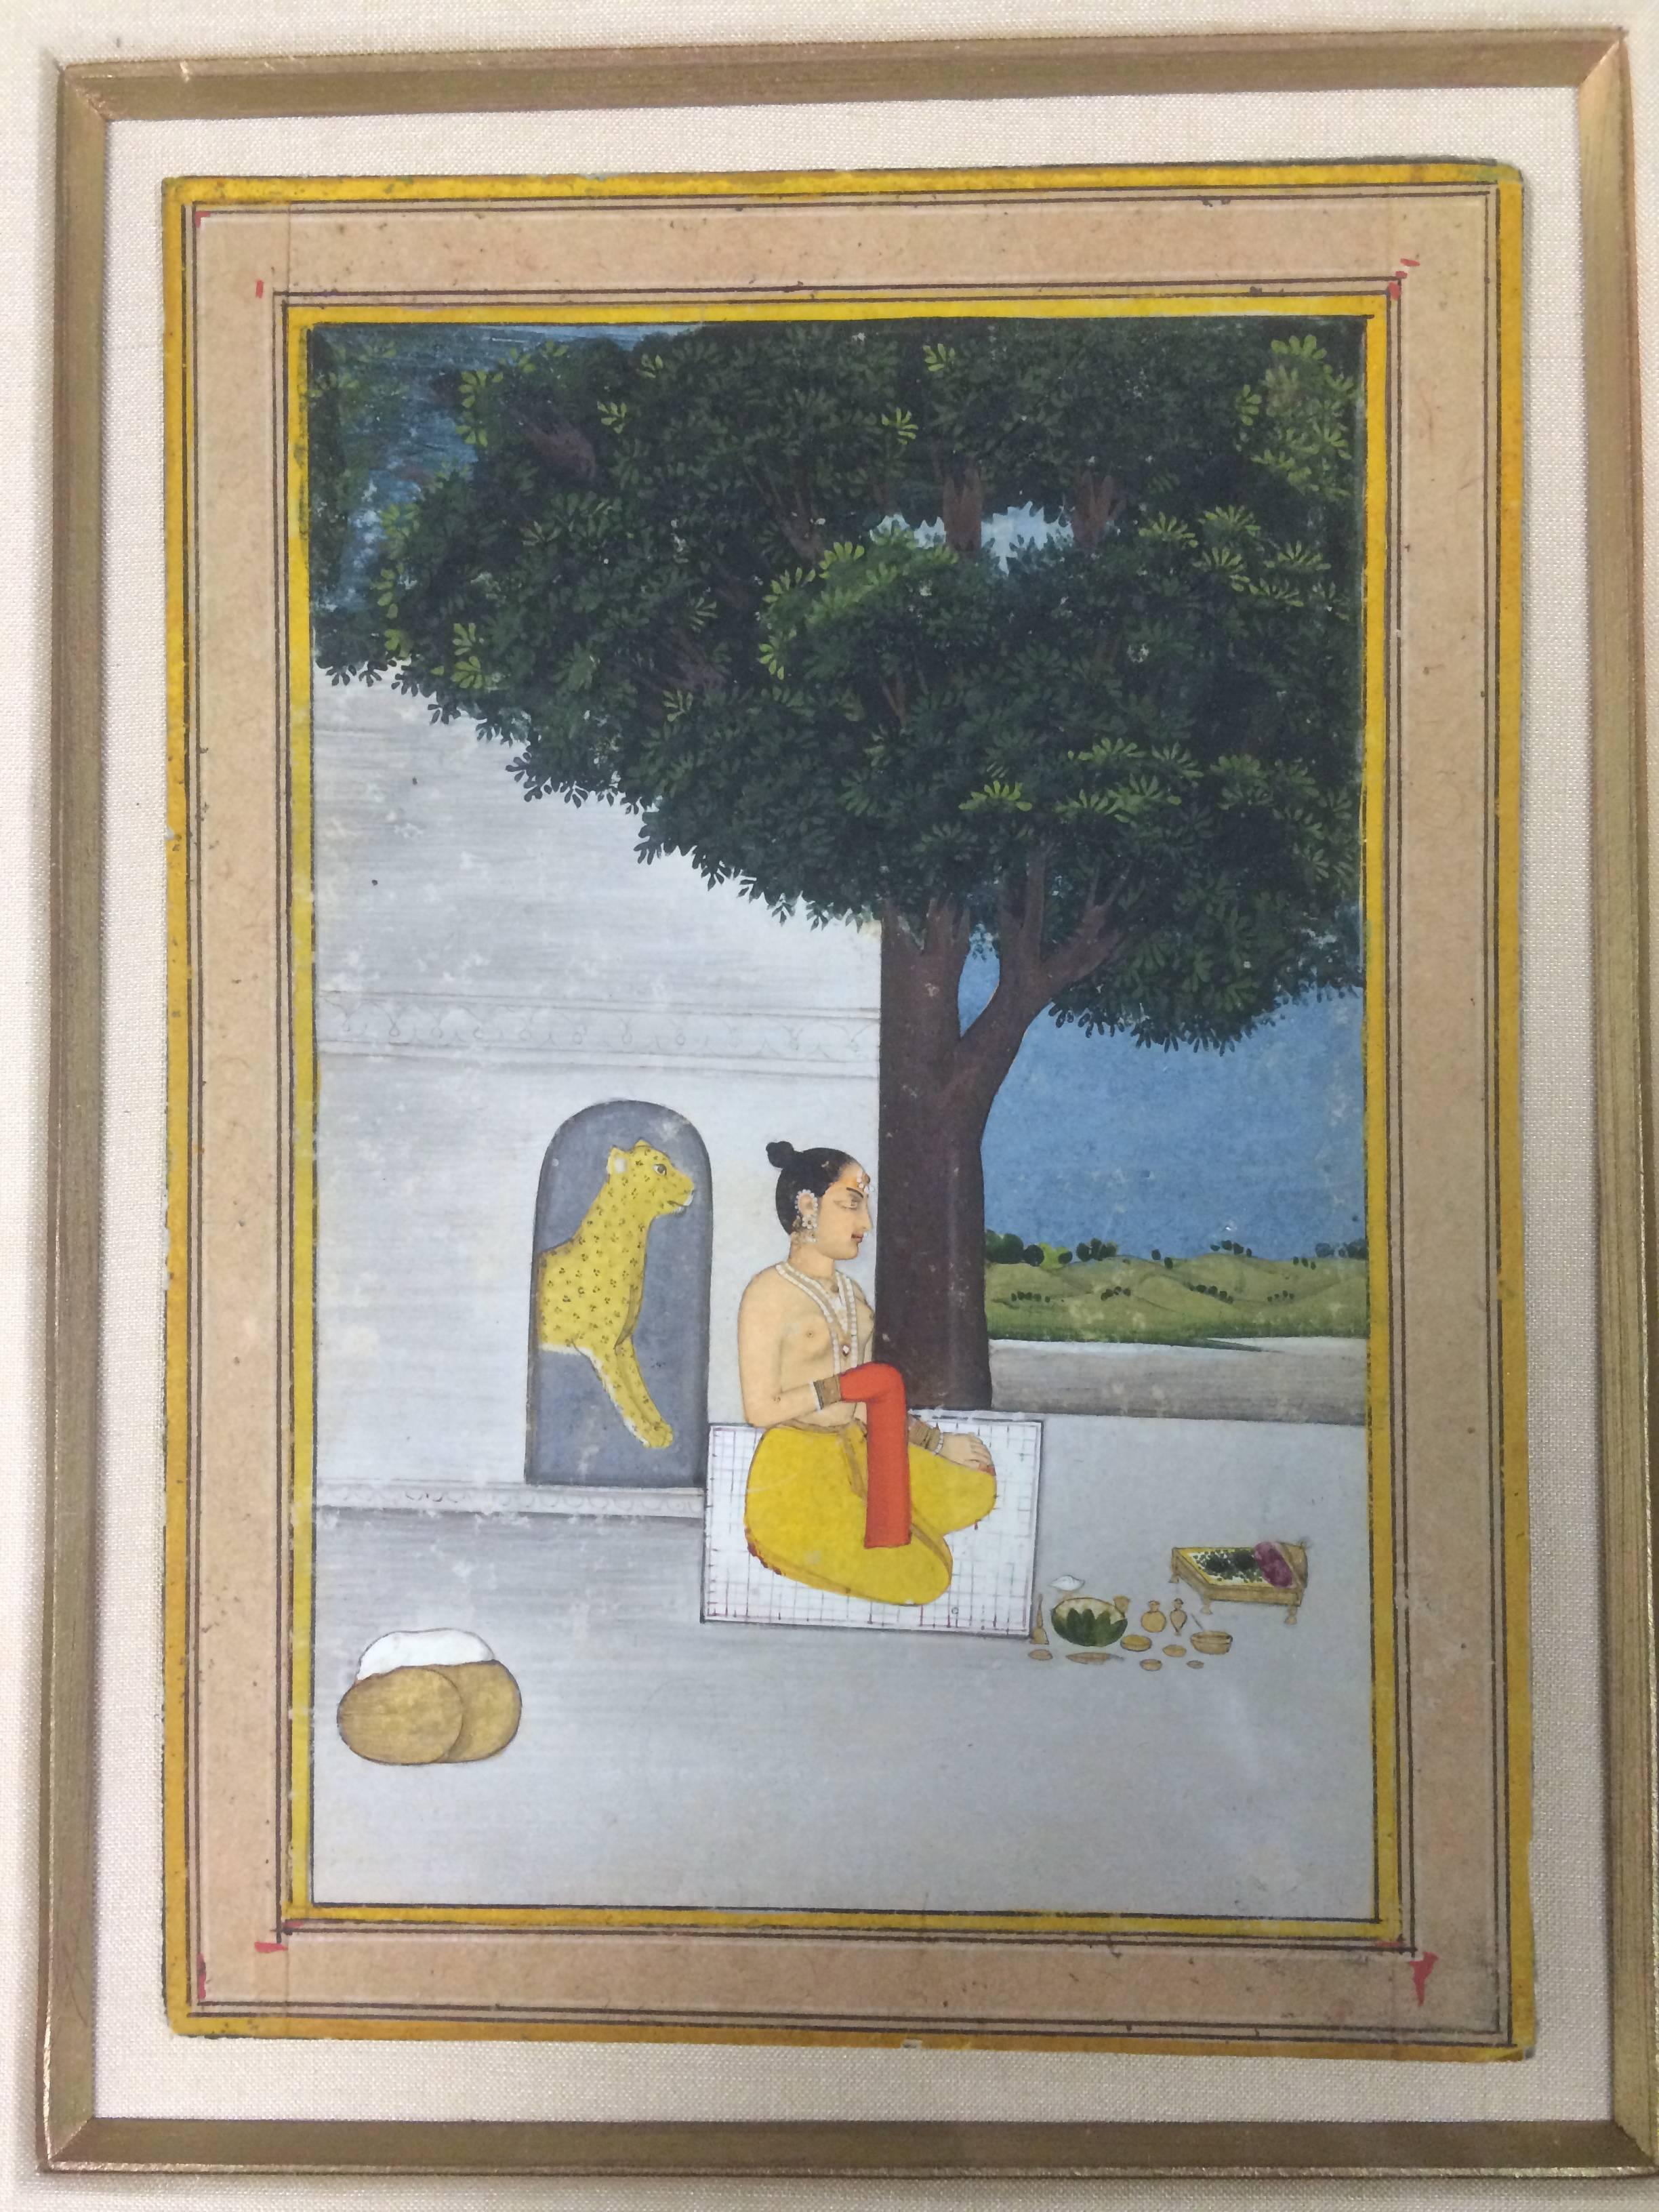 An illustration to a Ragamala series
Deccan, Central India, late 18th to early 19th century
Opaque pigments heightened on paper, the lone lady depicted topless, kneeling and making an offering, a yellow panther behind.